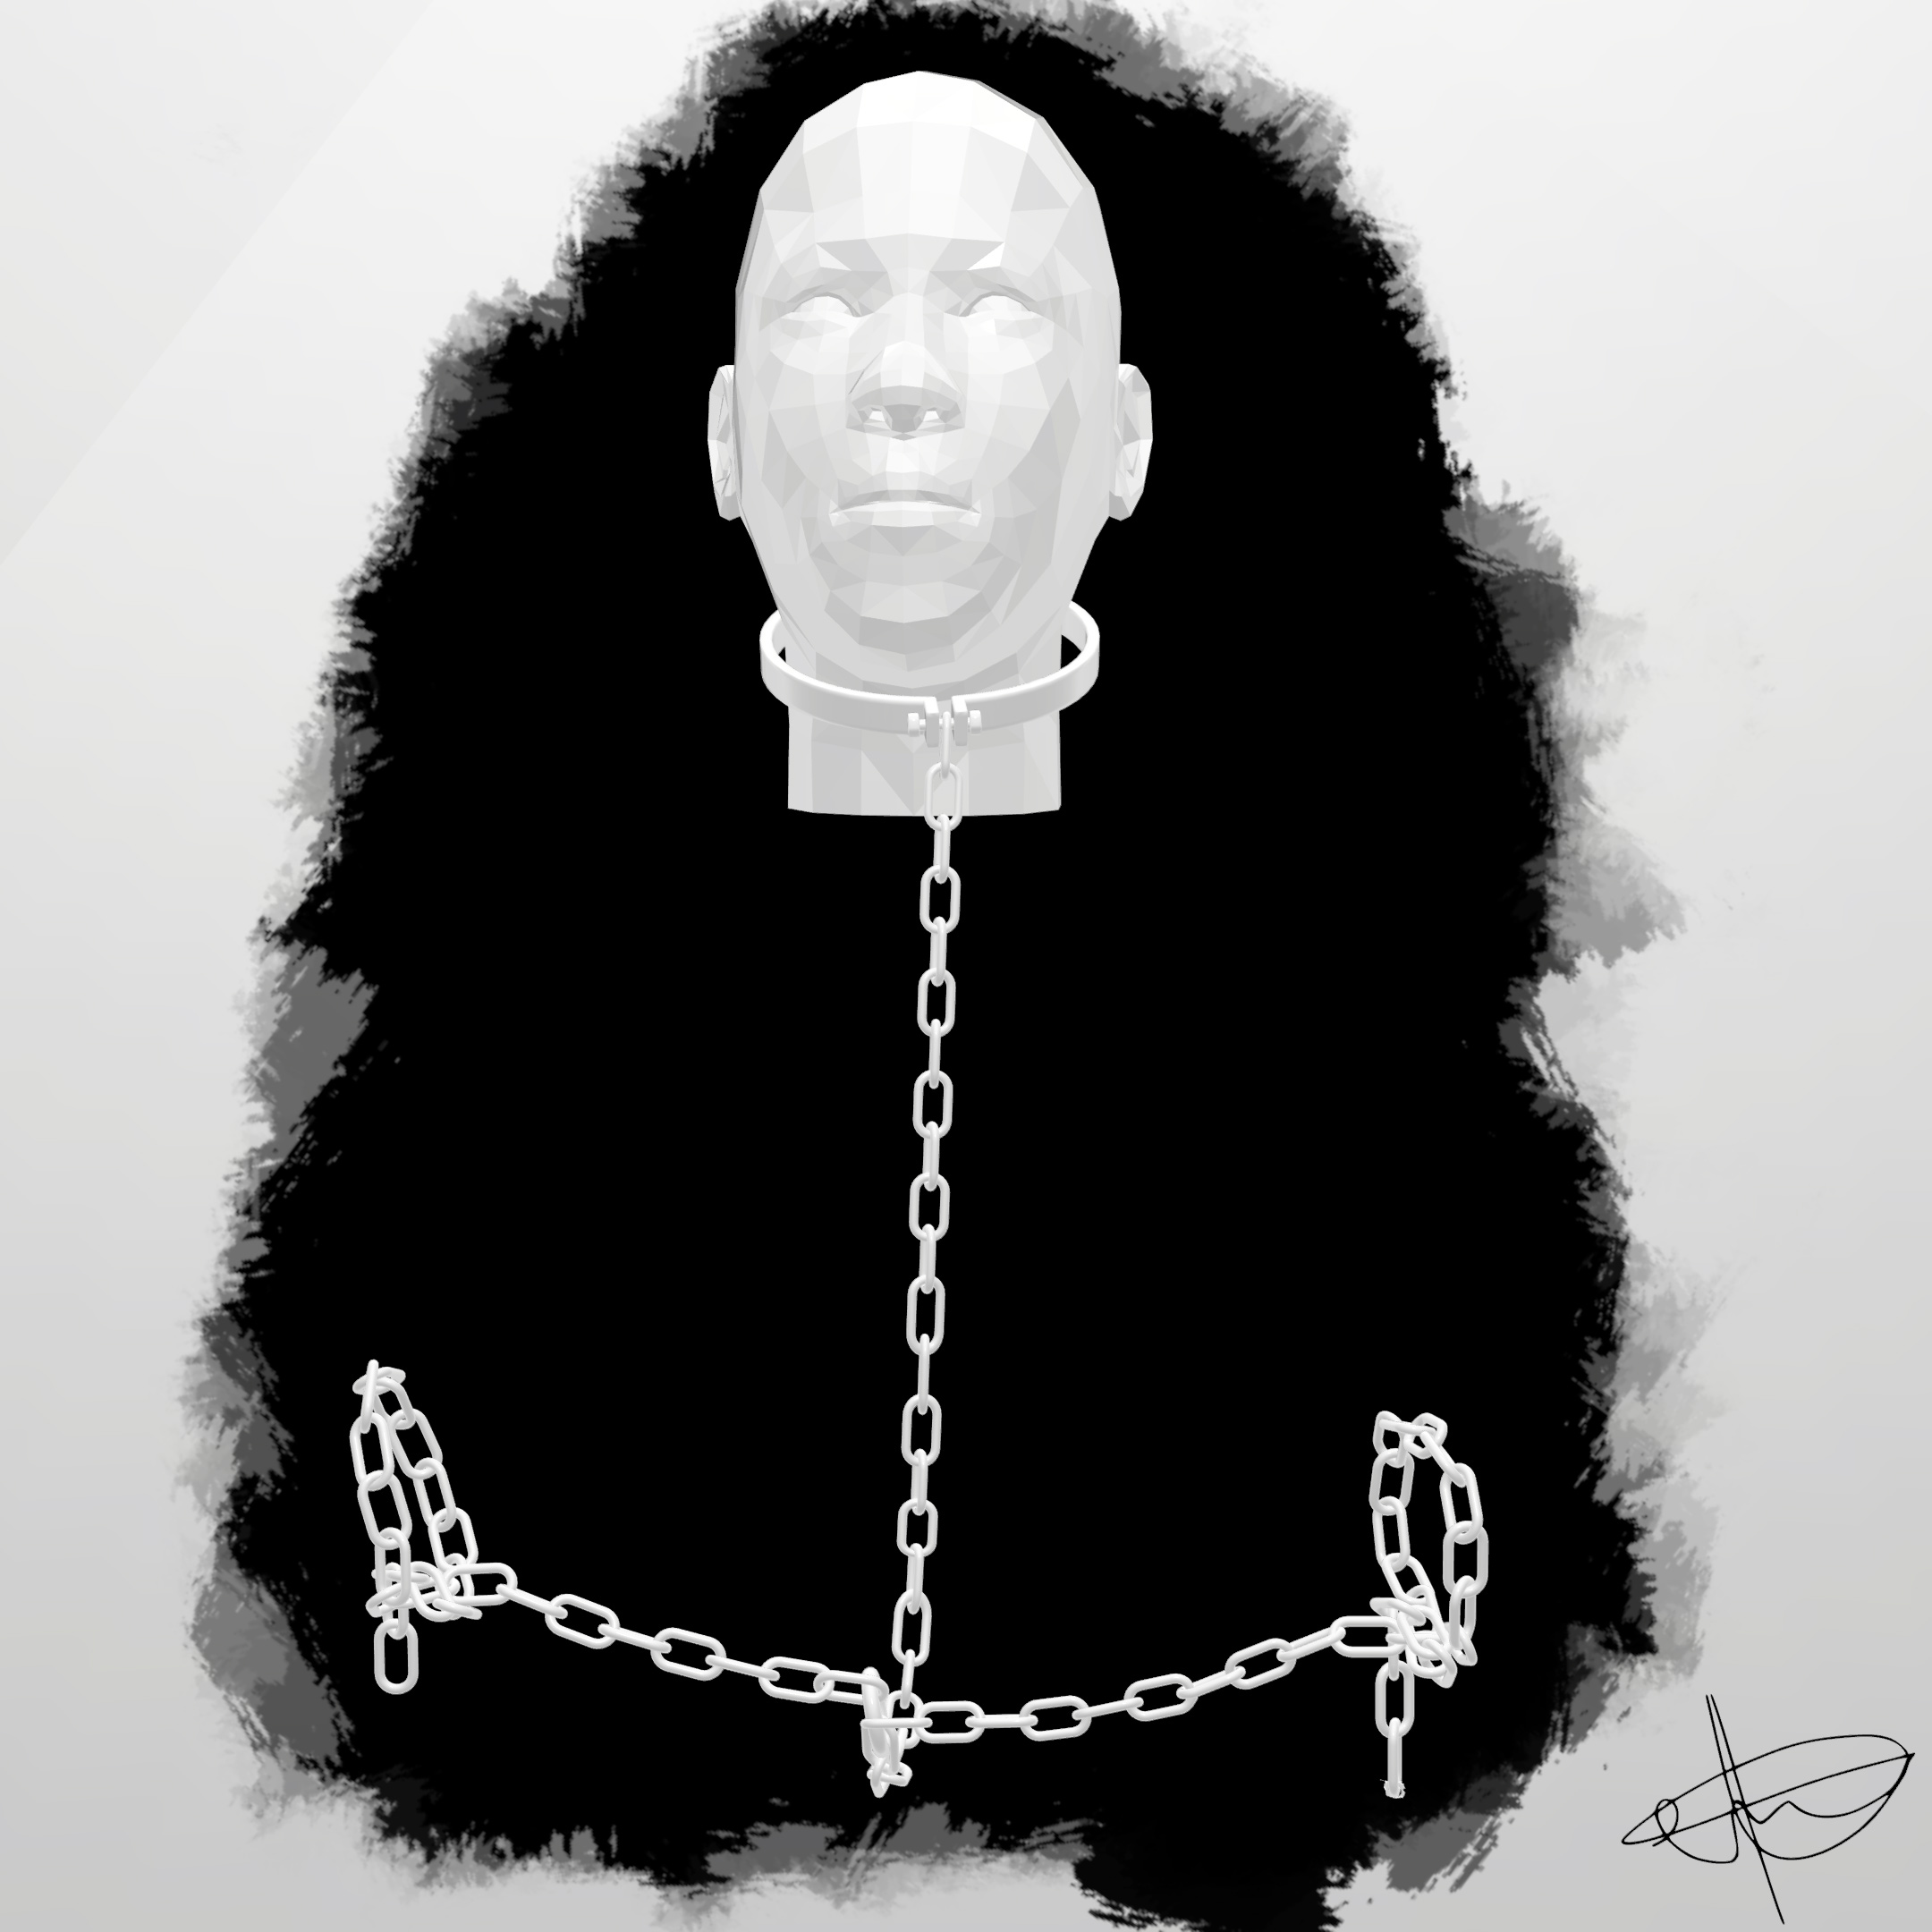 Soulless Art #2: Chained